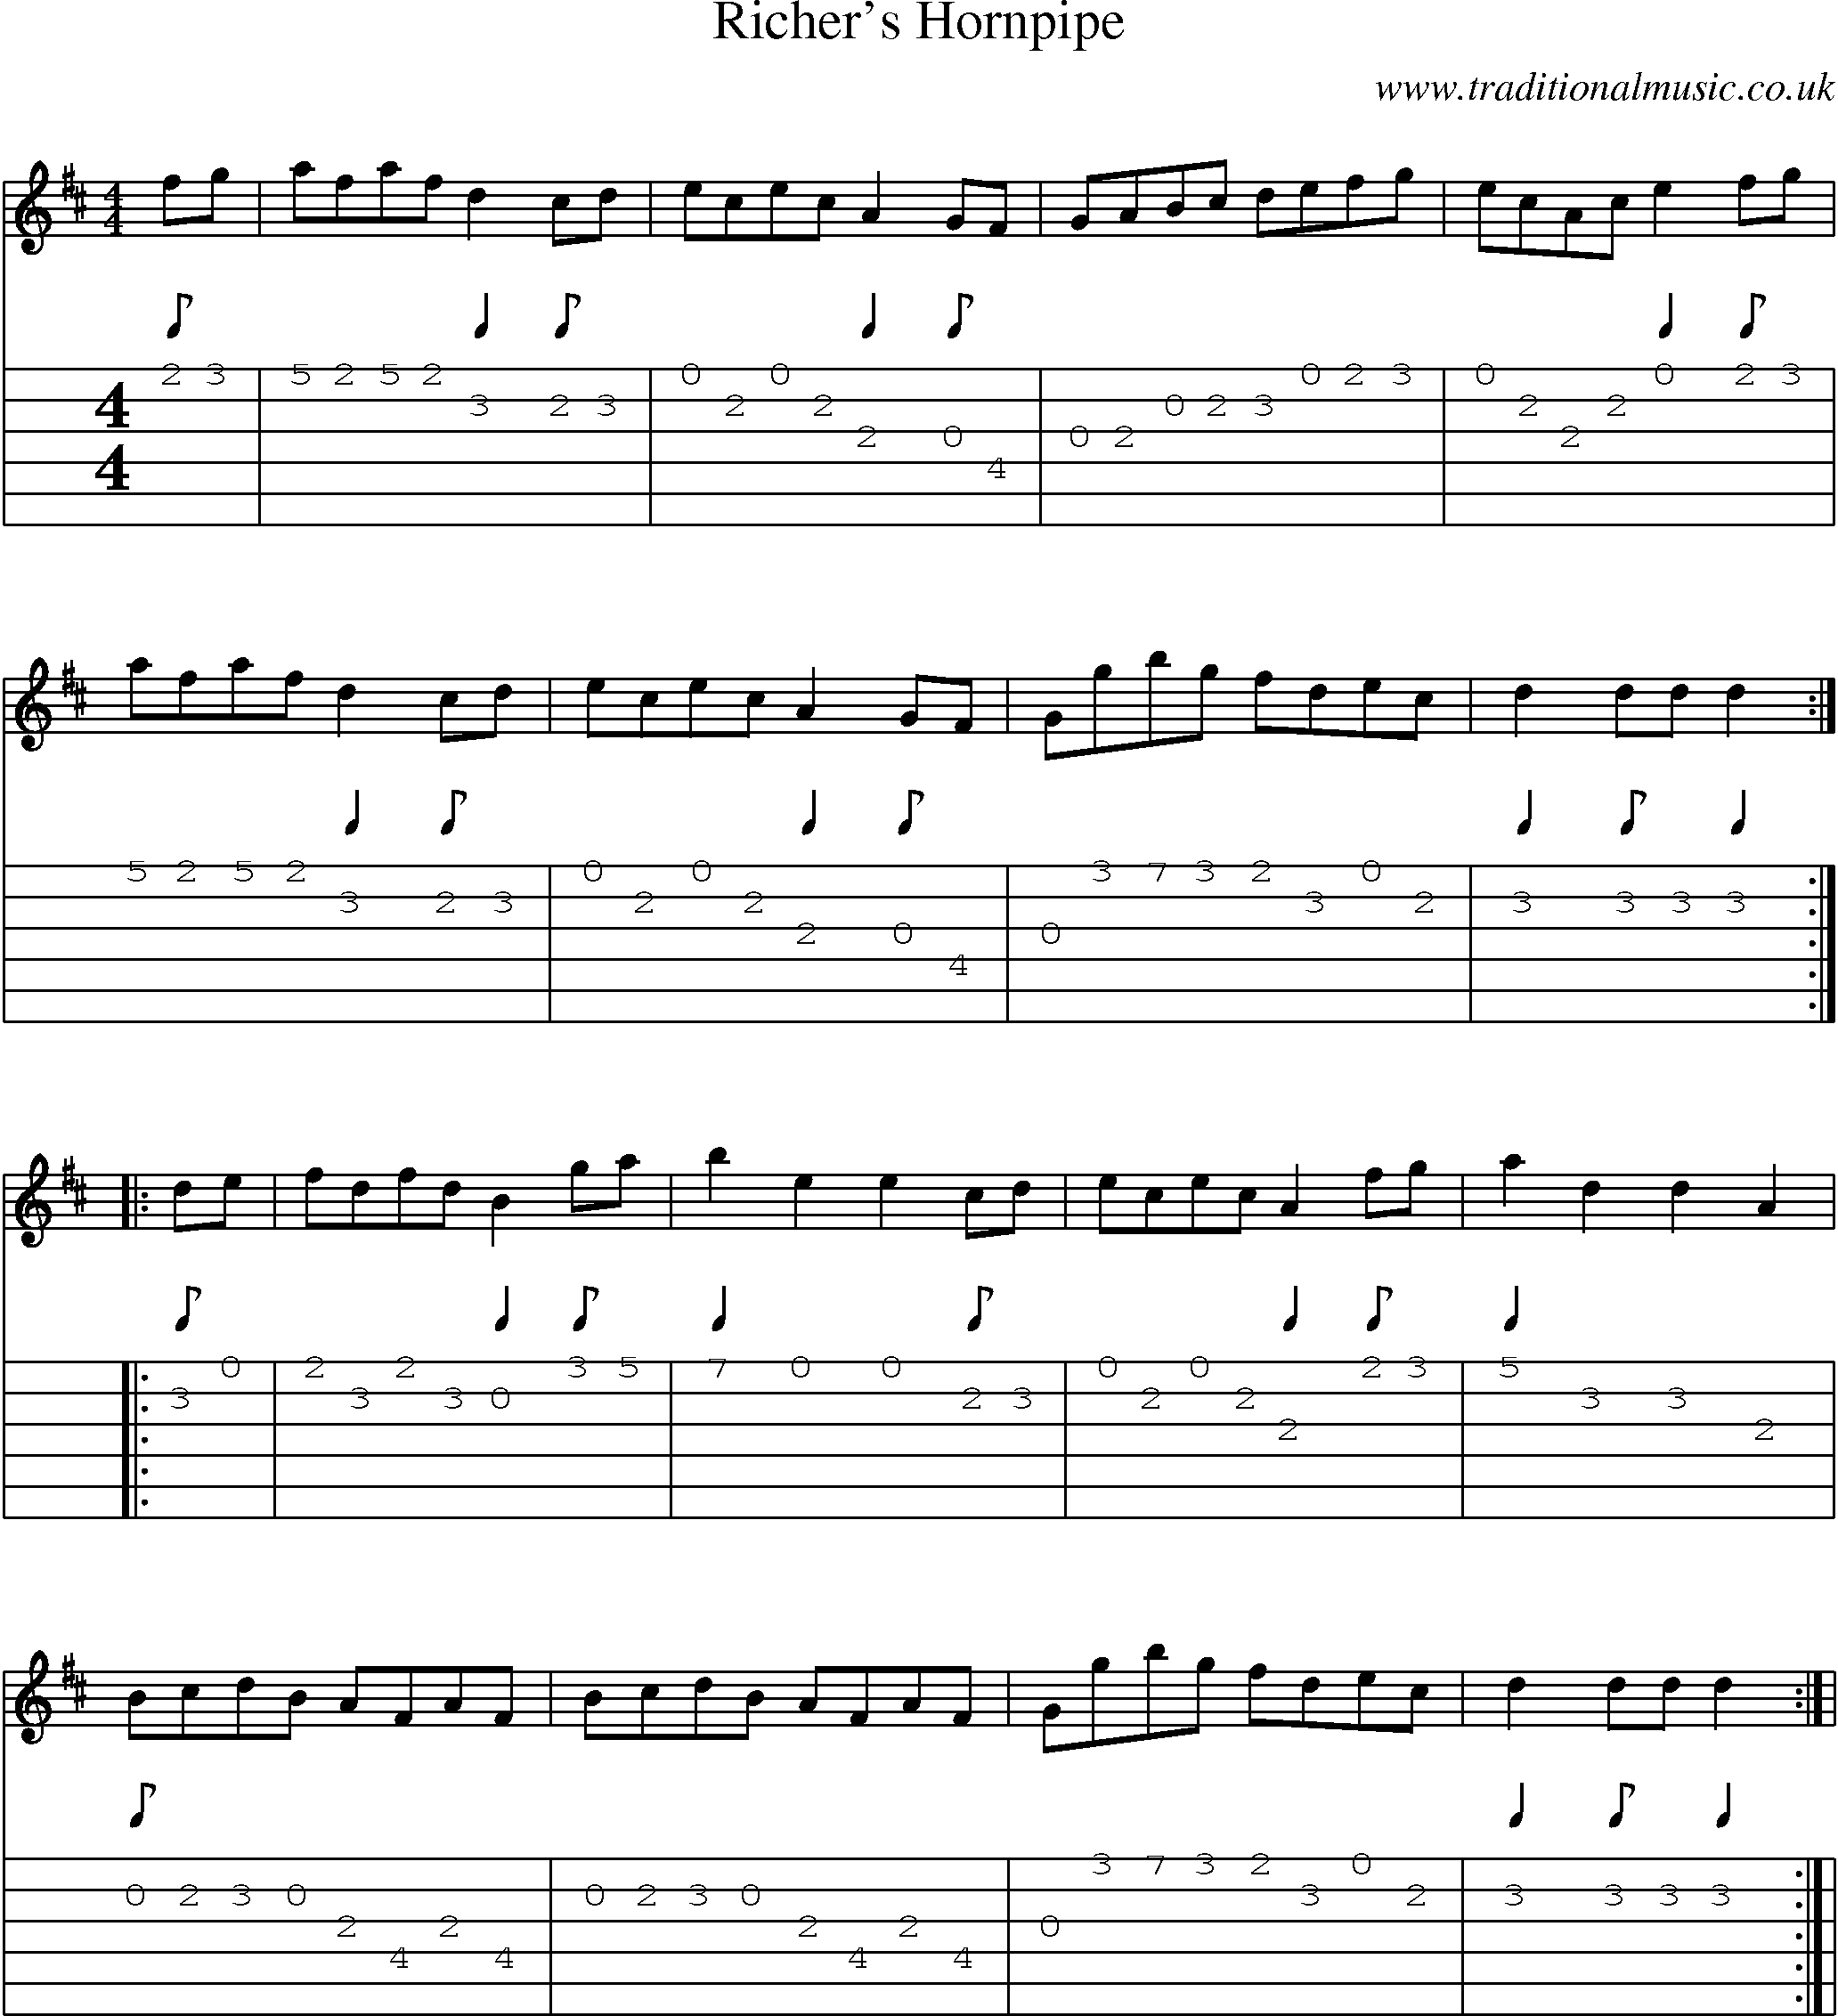 Music Score and Guitar Tabs for Richers Hornpipe